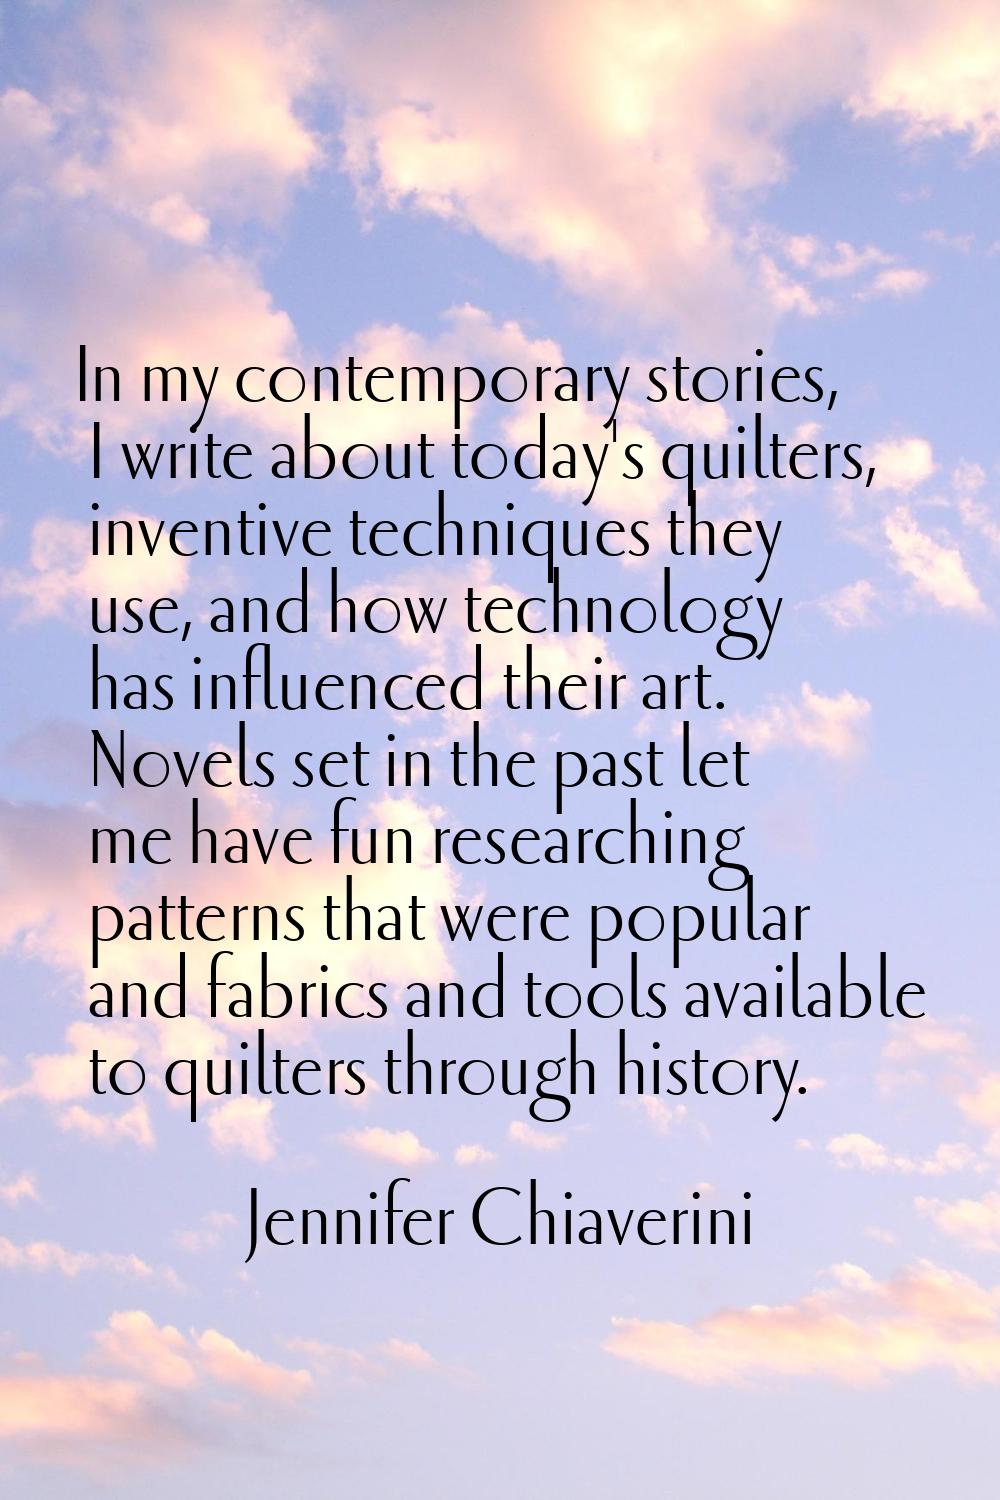 In my contemporary stories, I write about today's quilters, inventive techniques they use, and how 